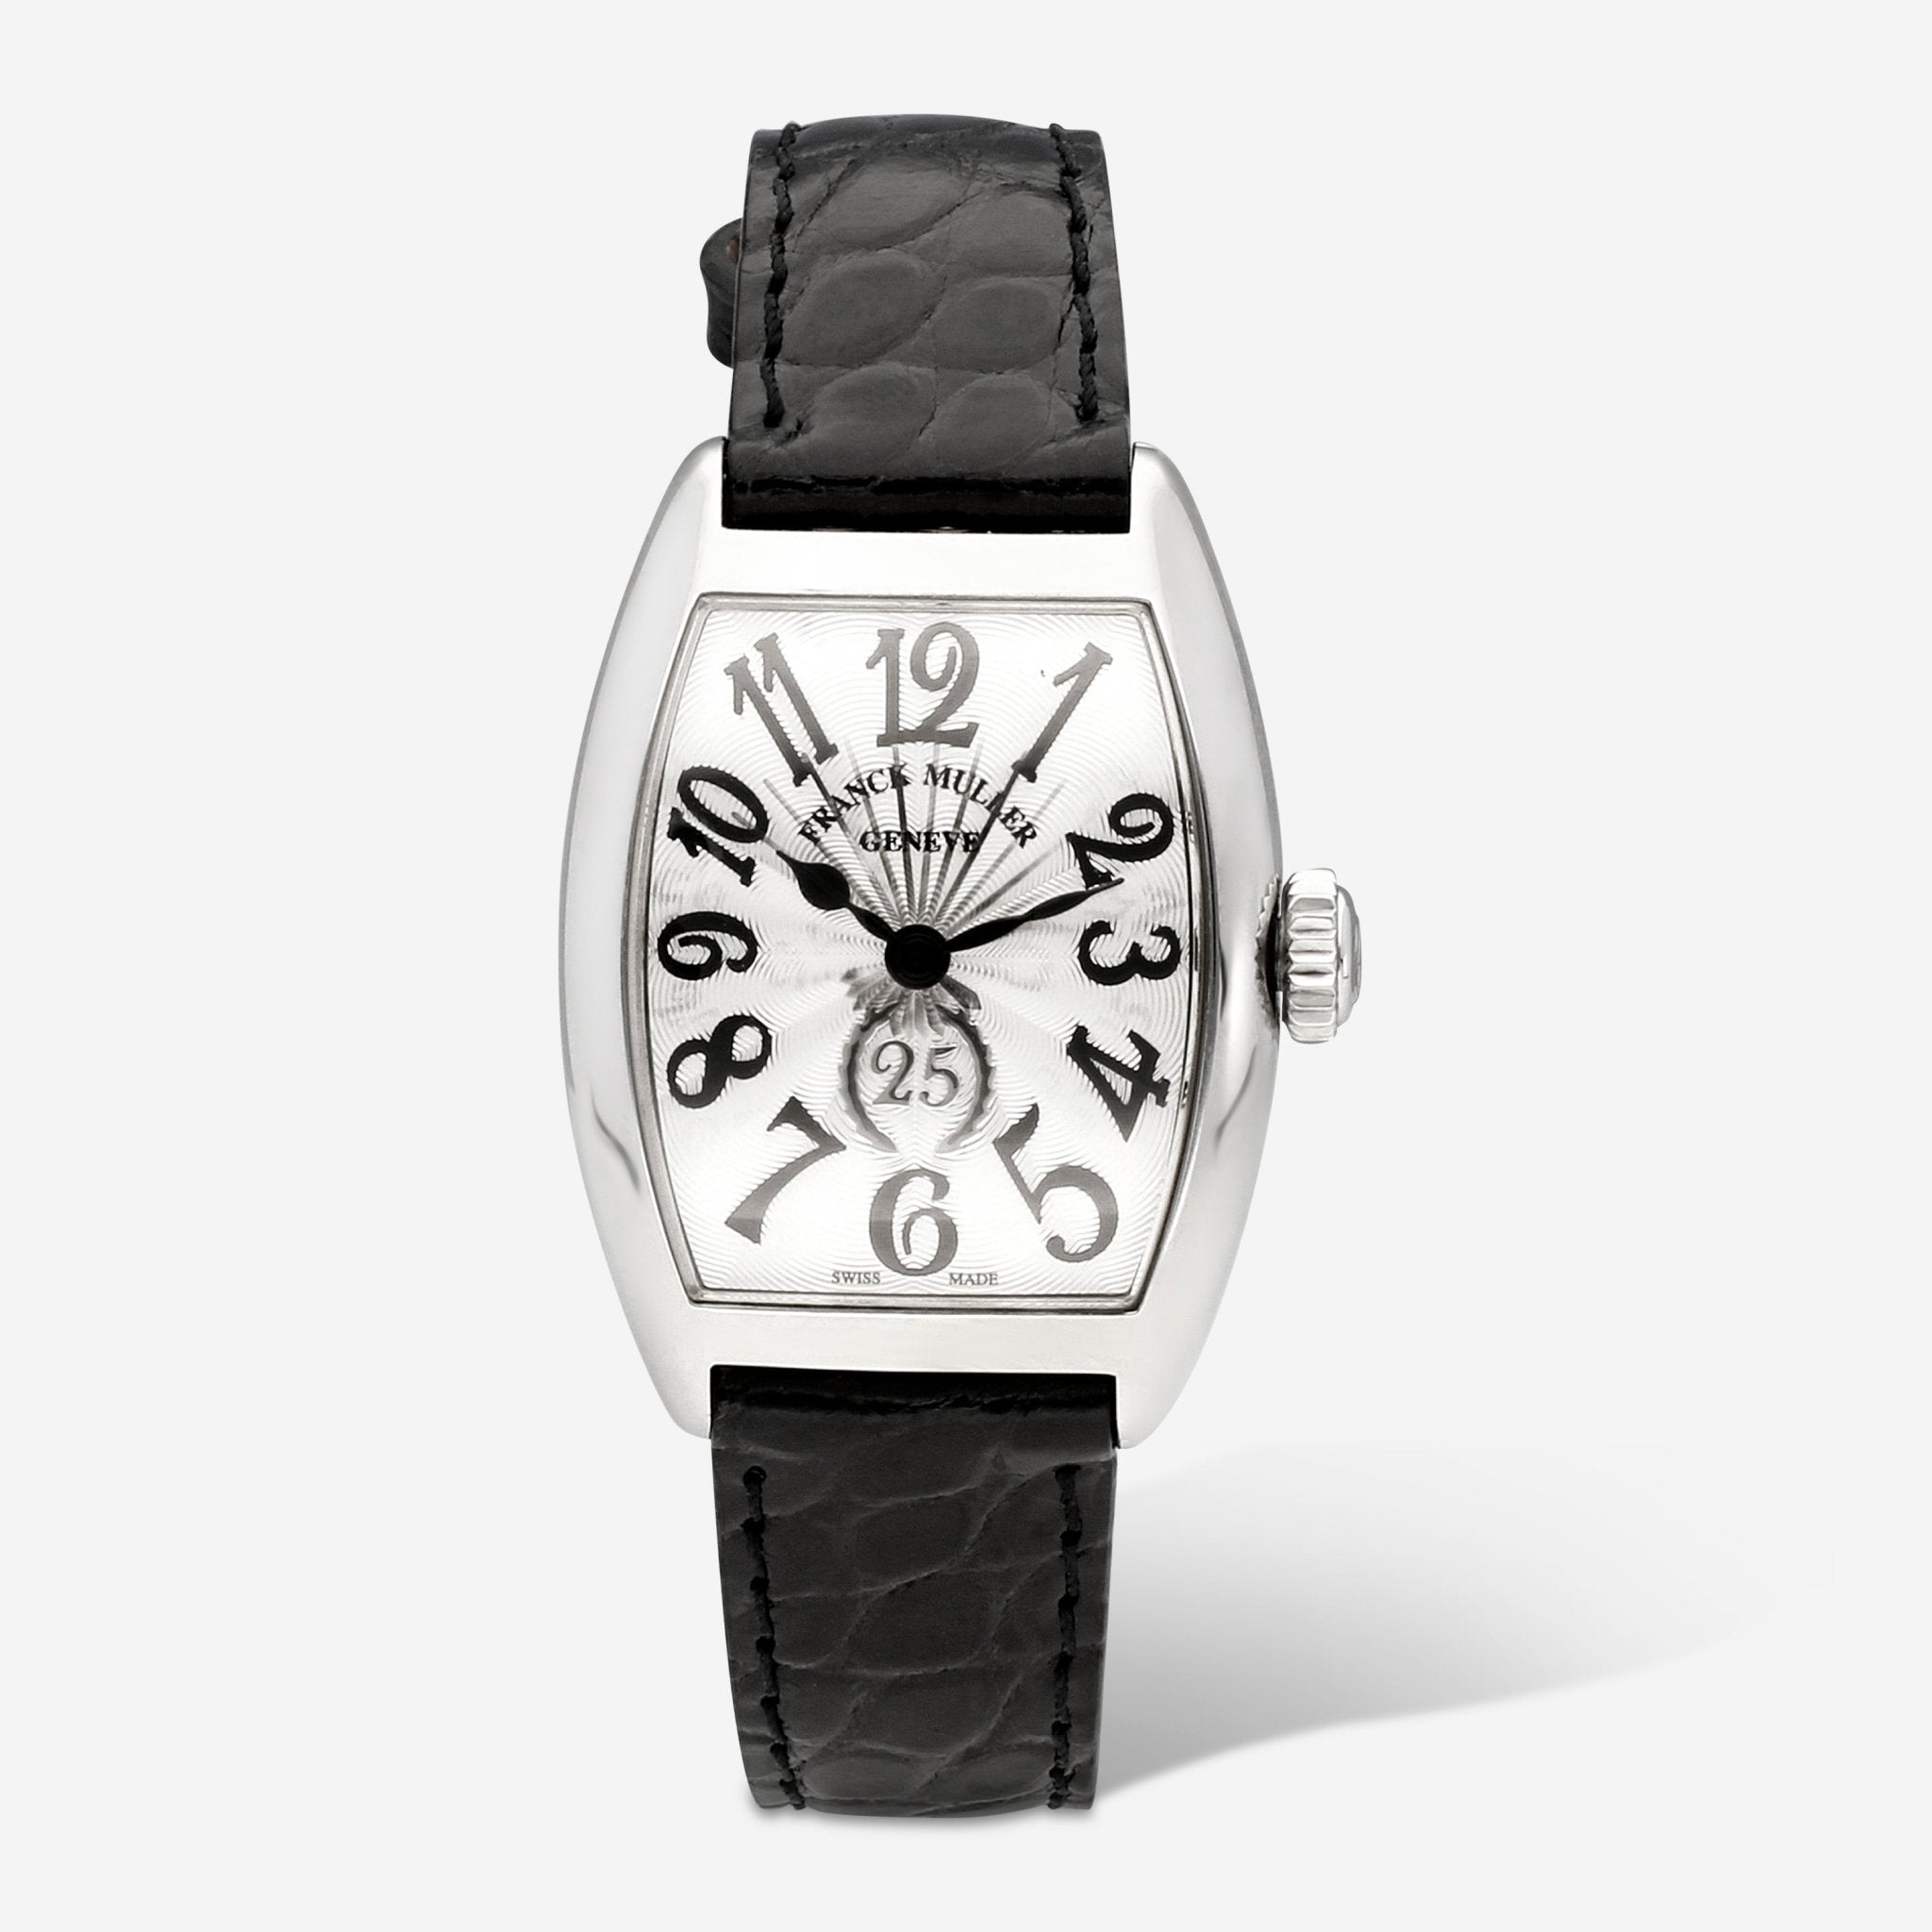 Franck Muller Cintree Curvex Silver Dial Automatic Unisex Watch 1750SCATFOLTD - THE SOLIST - Franck Muller